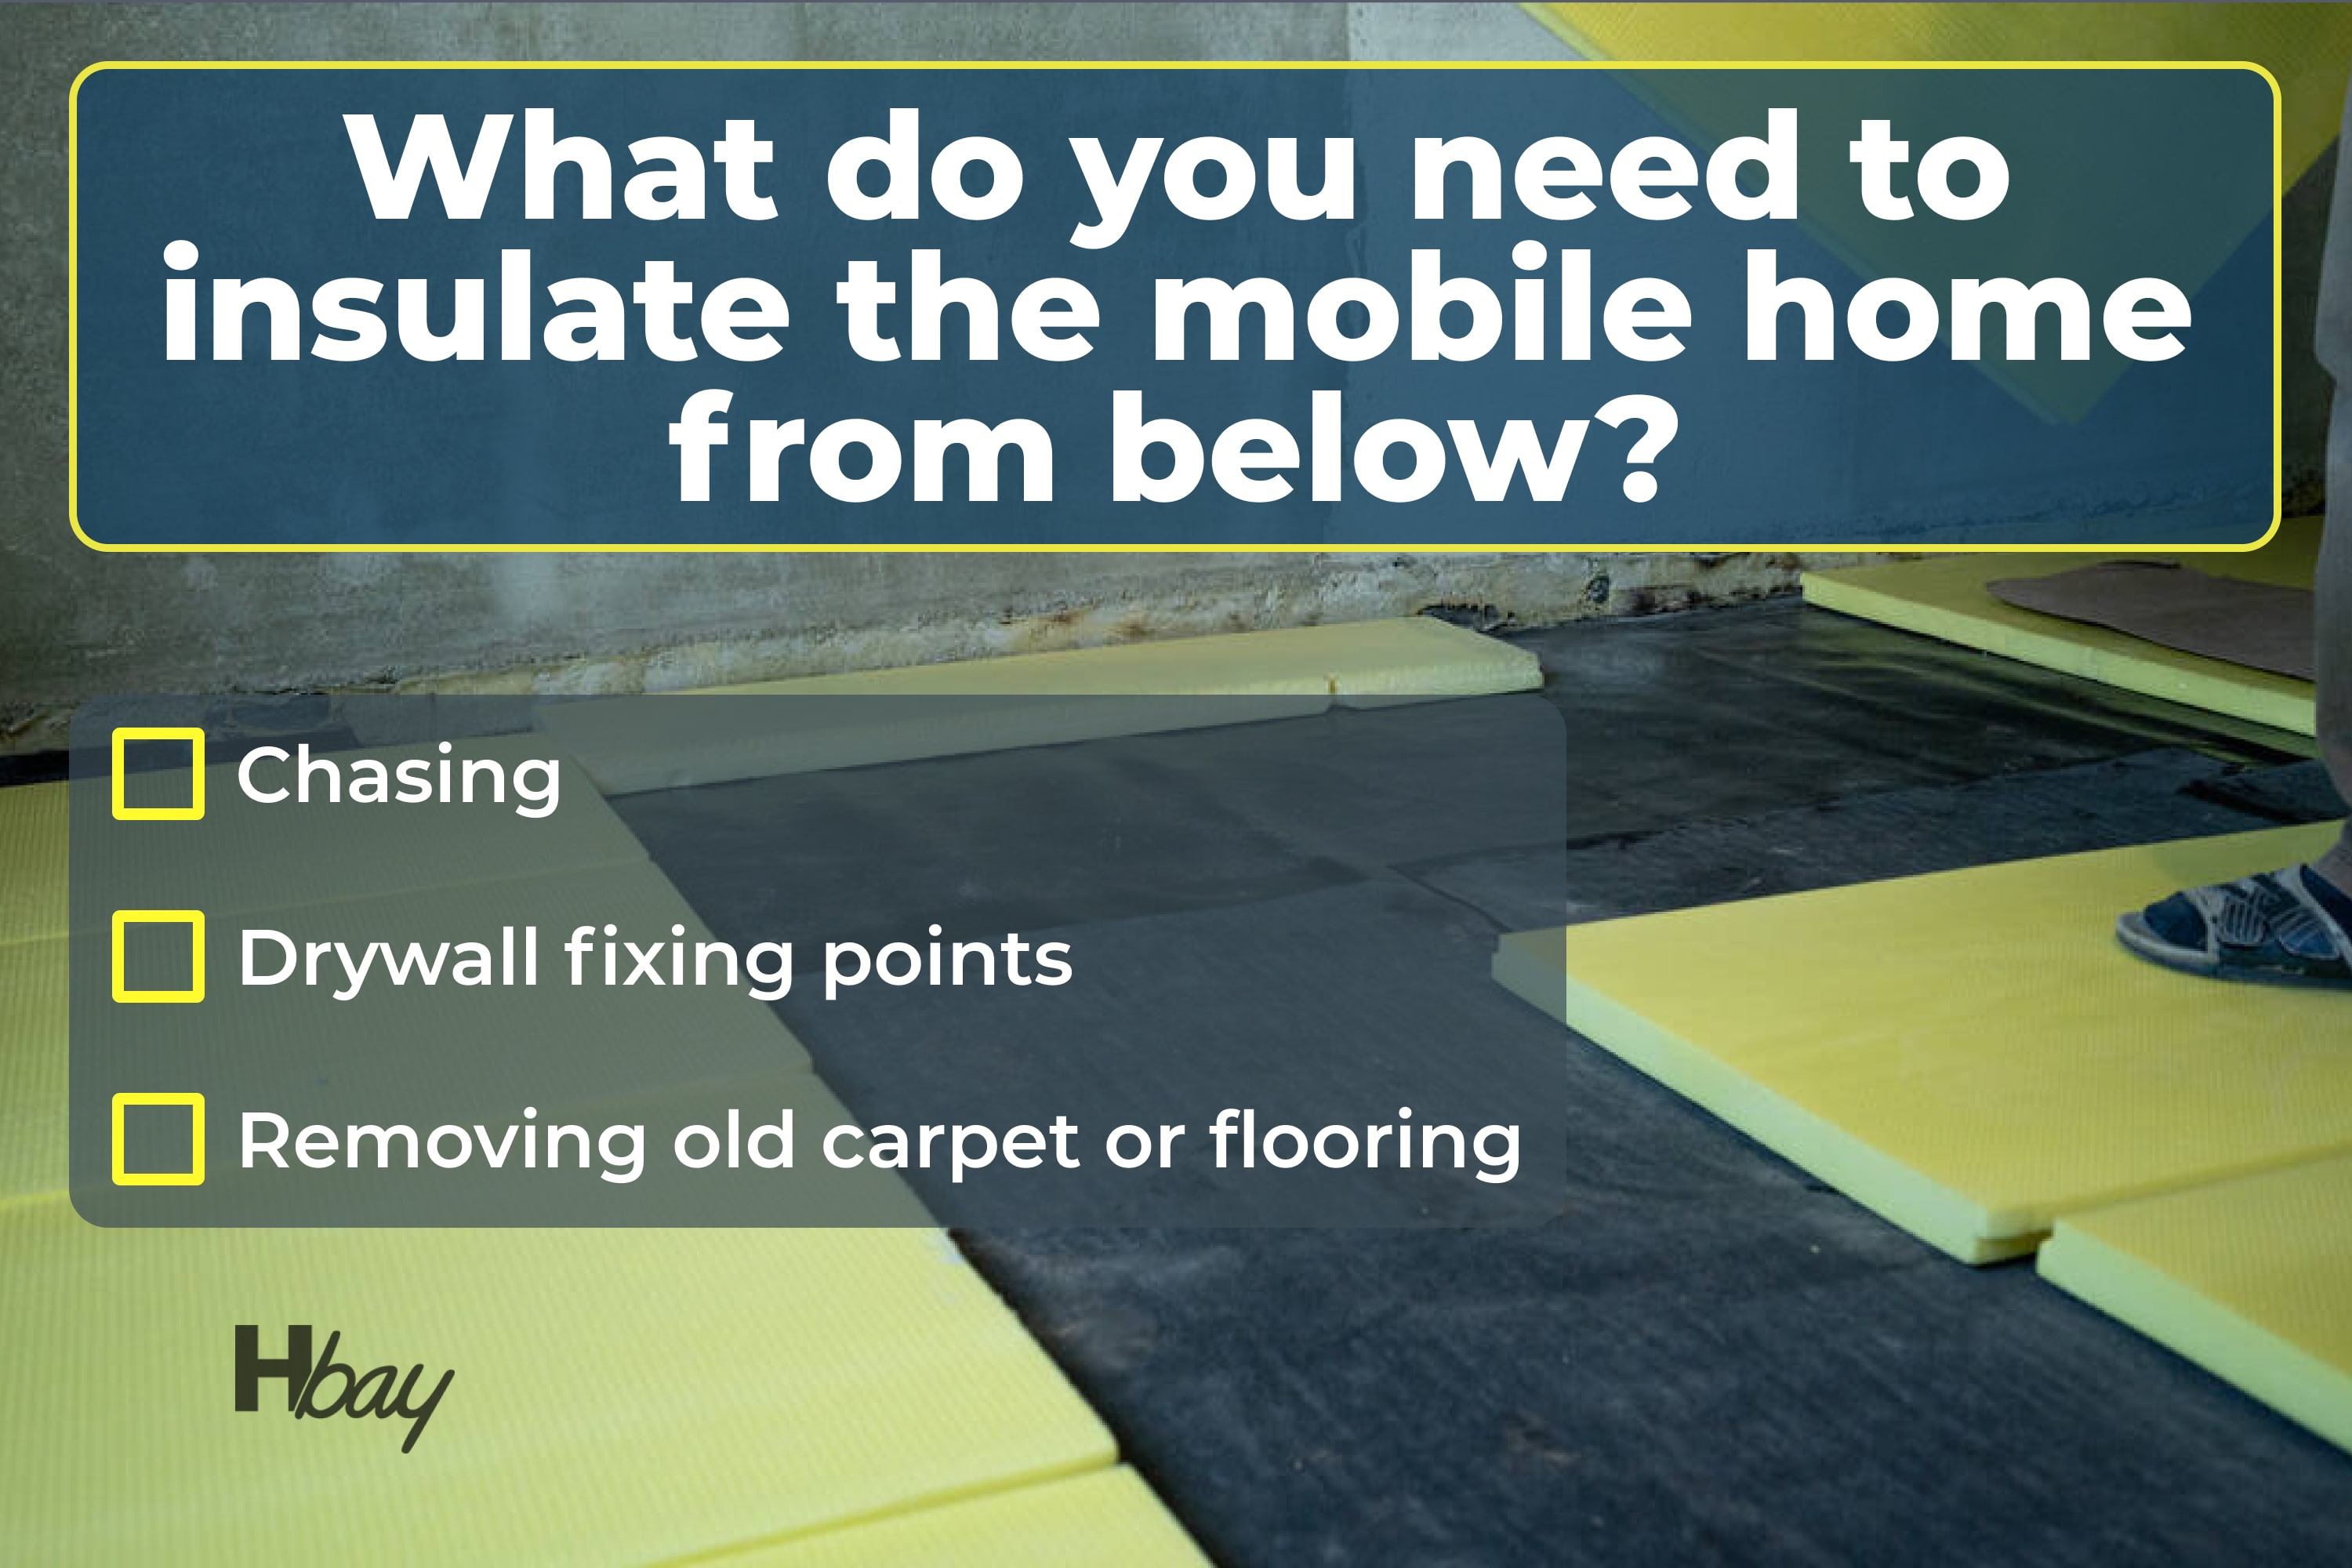 What do you need to insulate the mobile home from below